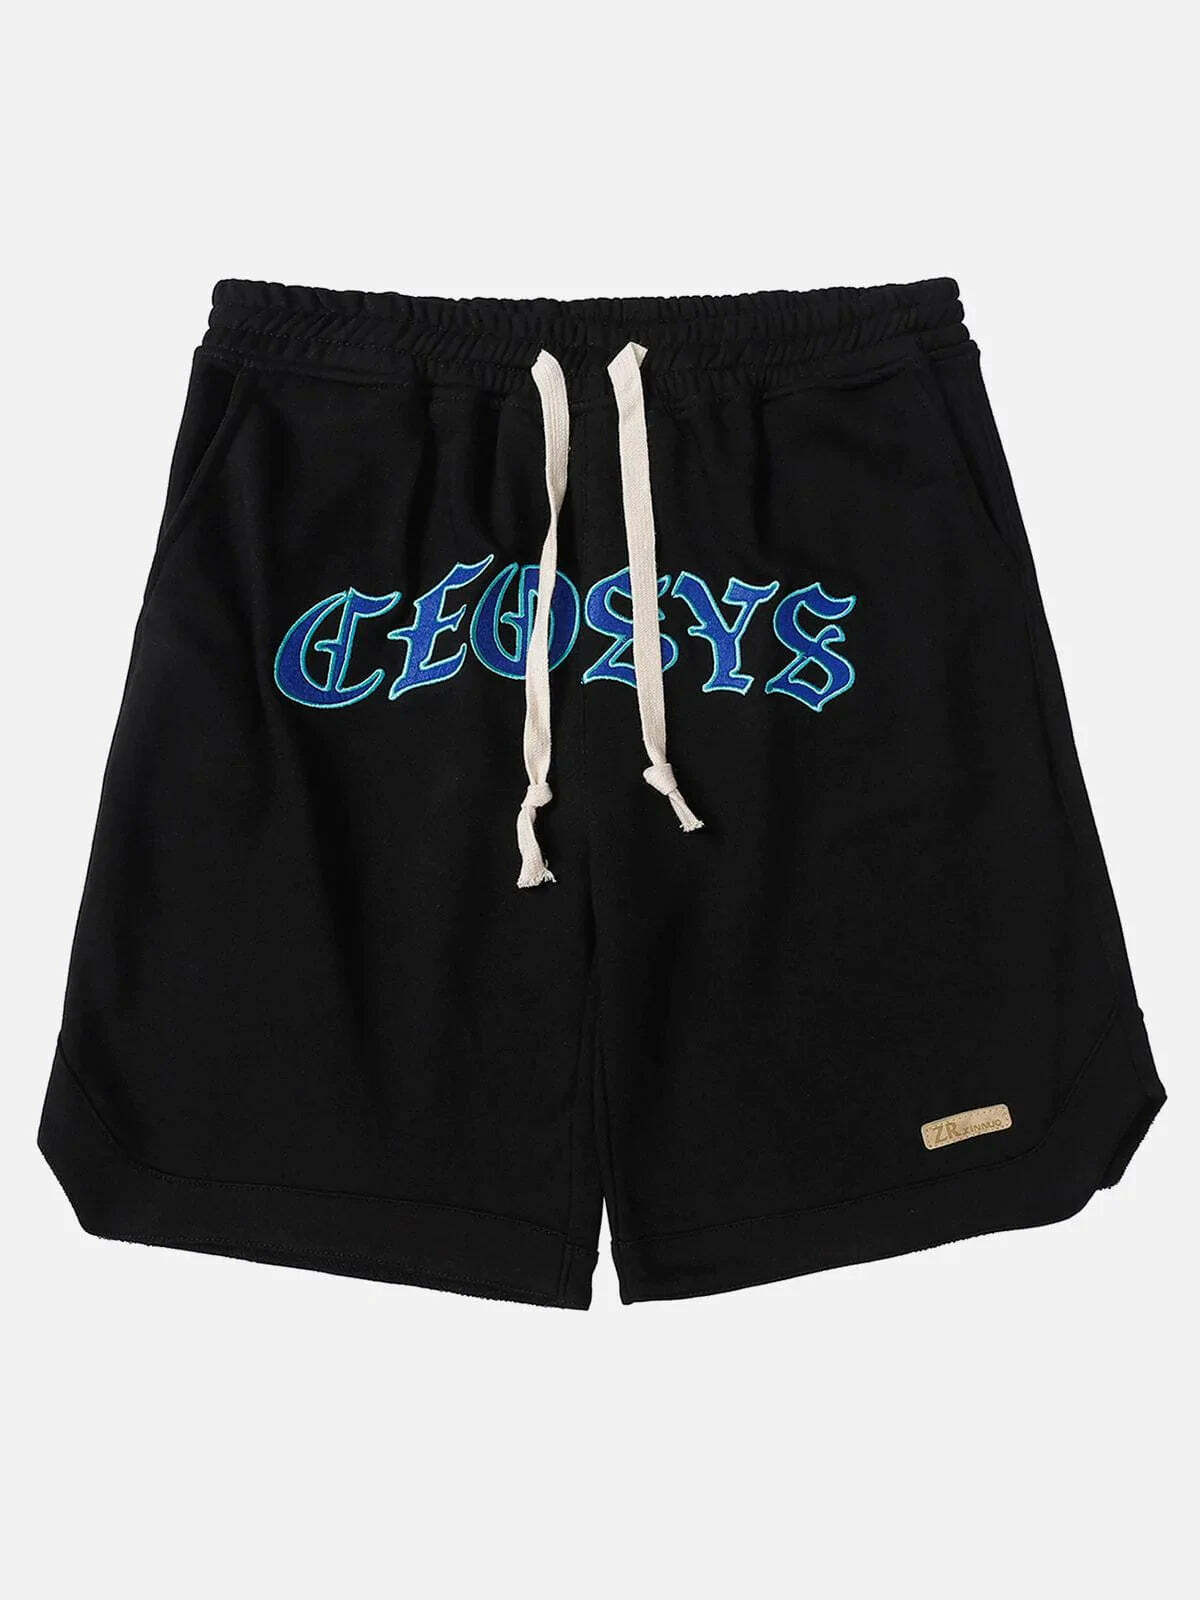 embroidered logo shorts edgy streetwear essential 3100